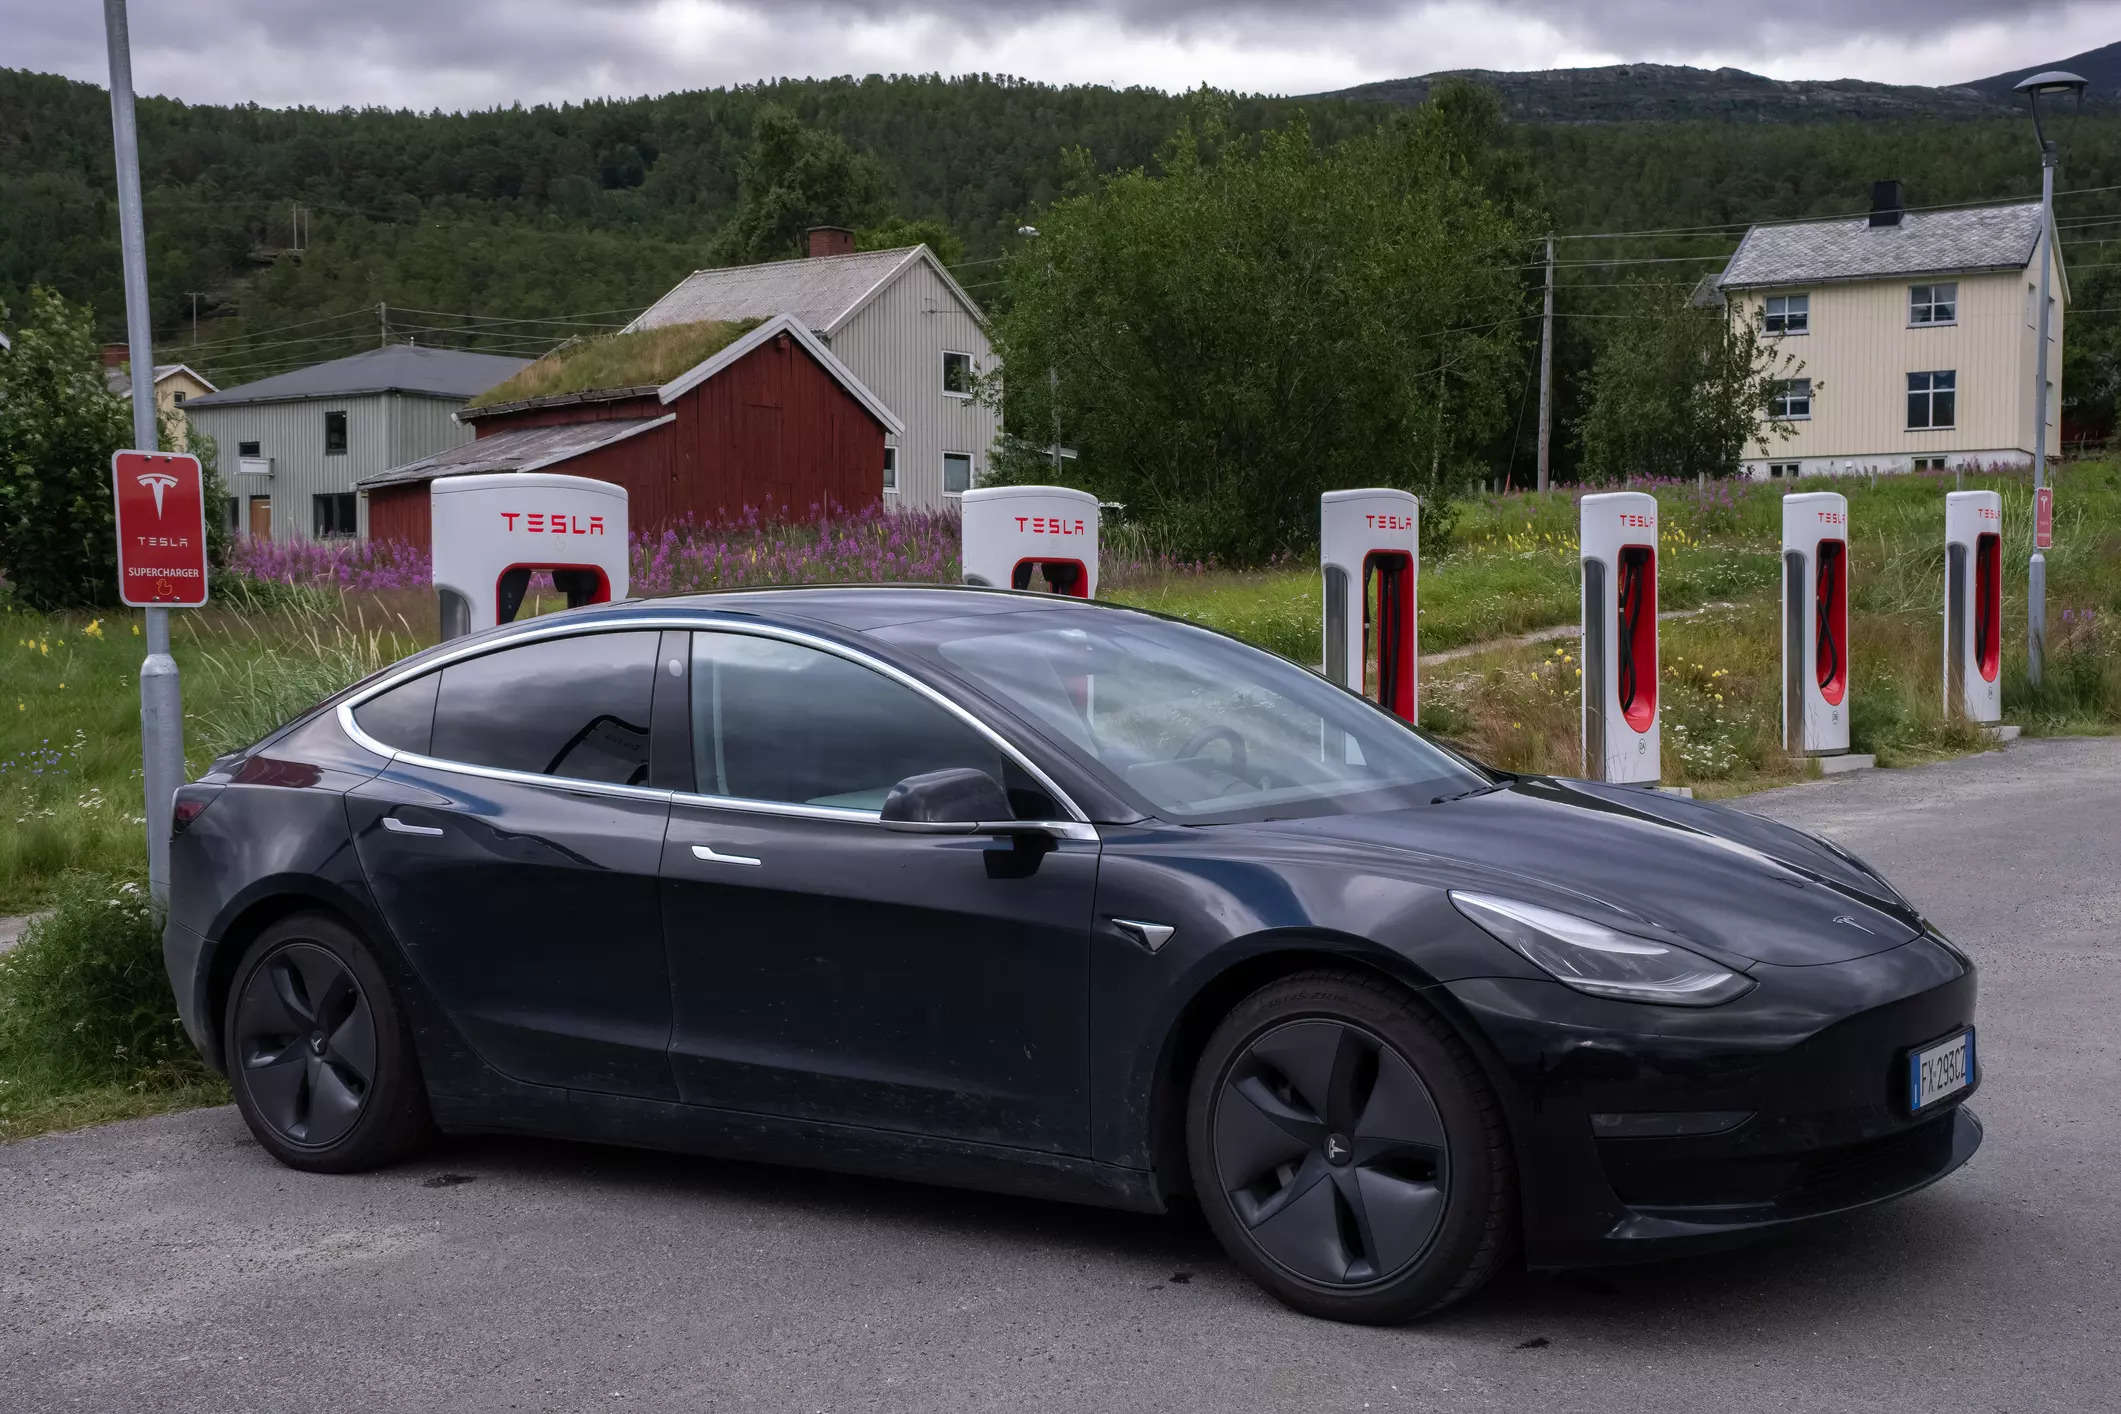  The share of battery electric vehicles (BEV) sold rose to 79.3% of all new cars in 2022 from 65% in 2021, up from 2.9% a decade ago, the Norwegian Road Federation (OFV) said.